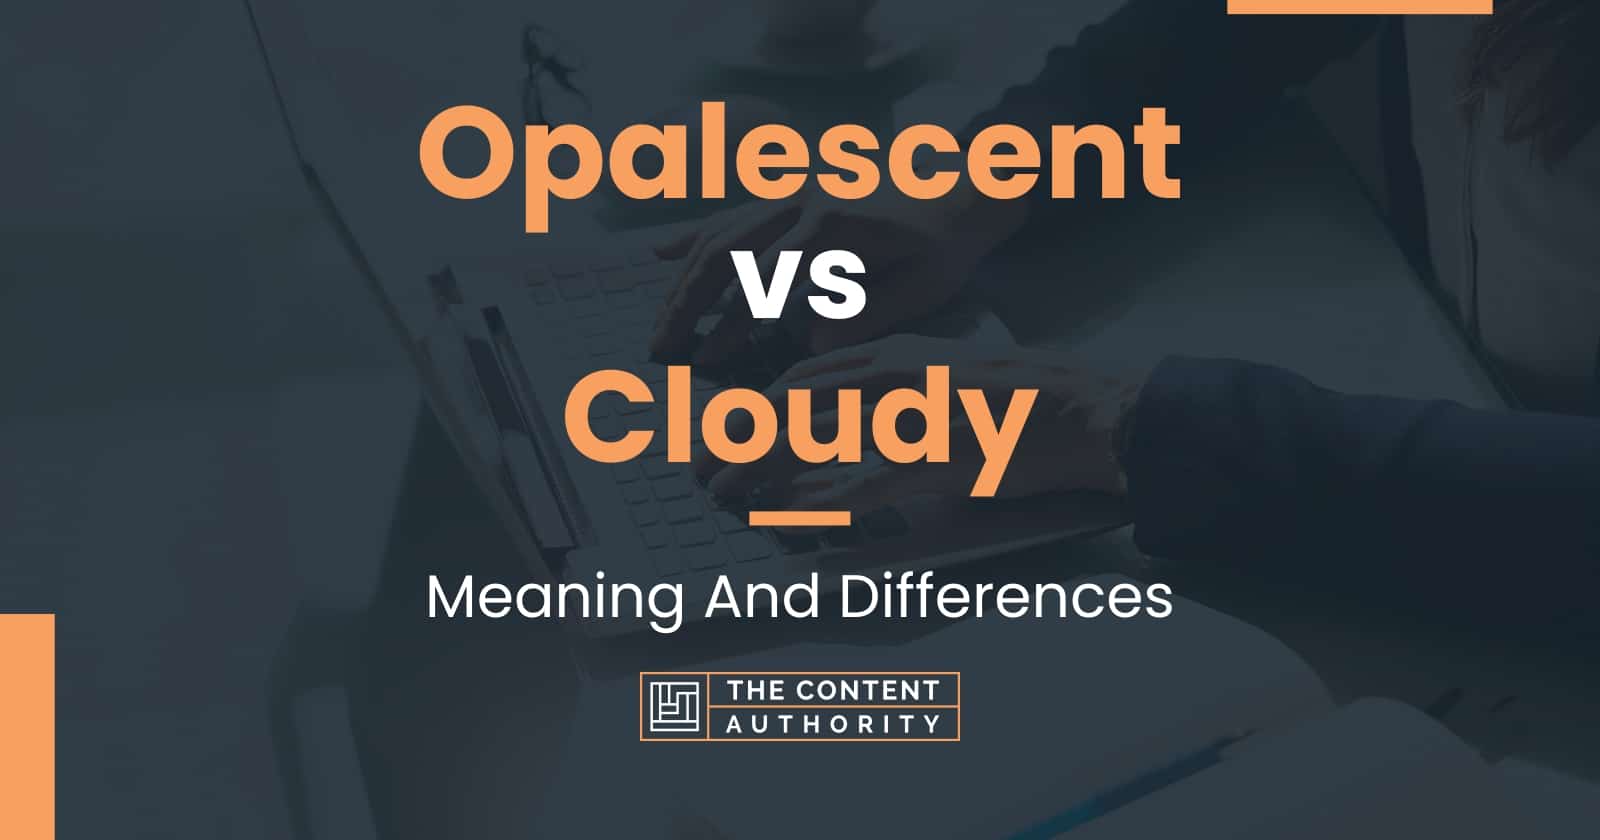 Opalescent vs Cloudy: Meaning And Differences